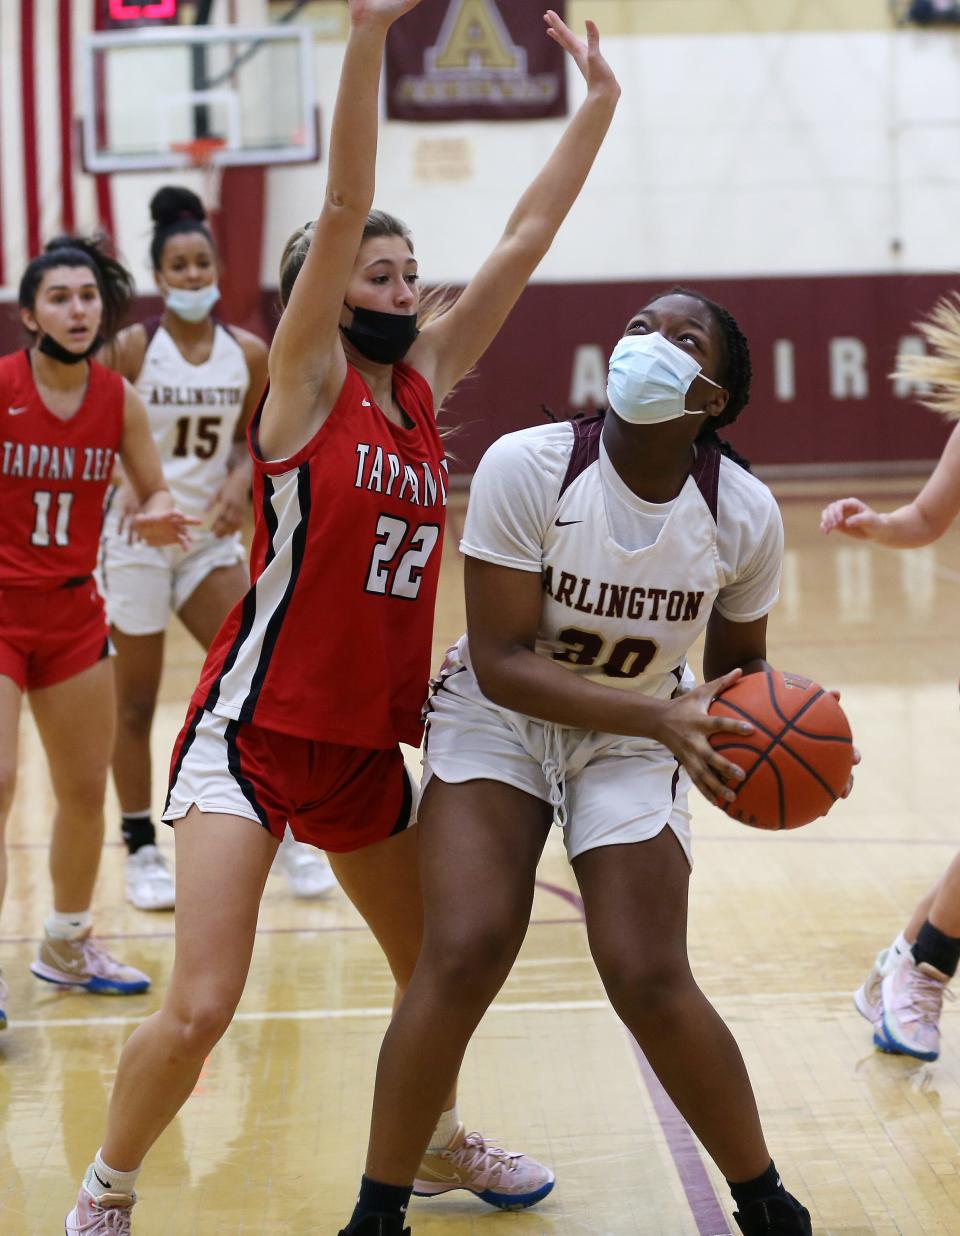 Arlington's Nneoma Ezeilo (30) tries to go up for a shot in front of Tappan Zee's Brooke Comito (22) during girls basketball action at Arlington High School in Freedom Plains Jan. 26, 2022. Tappan Zee won the game 57-47.